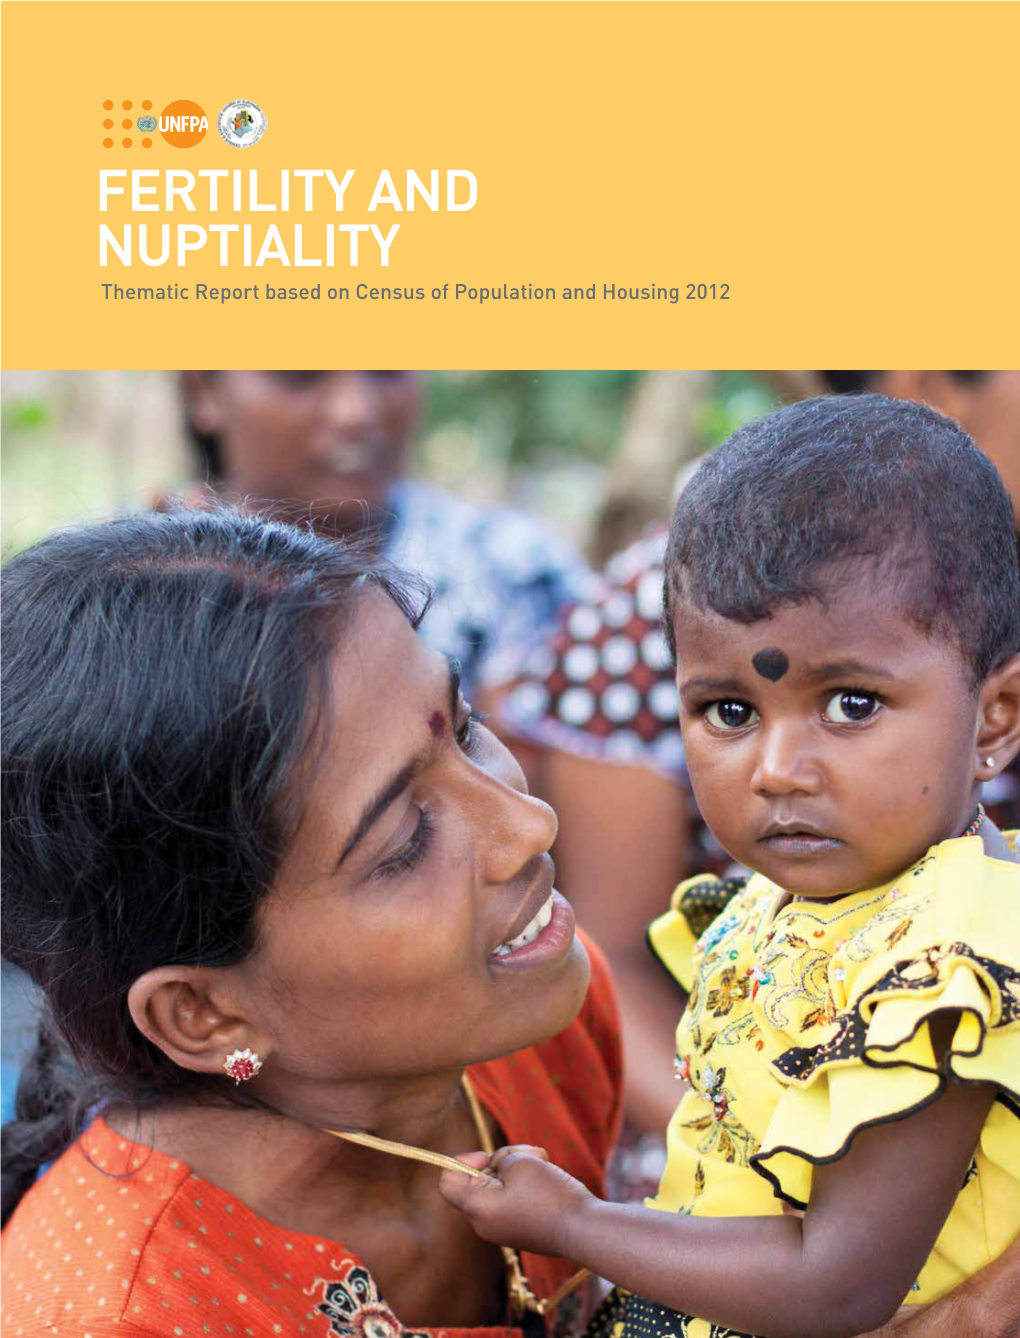 Fertility and Nuptiality 1 Fertility and Nuptiality Thematic Report Based on Census of Population and Housing 2012 Fertilitylead Author and Nuptiality 2 Prof